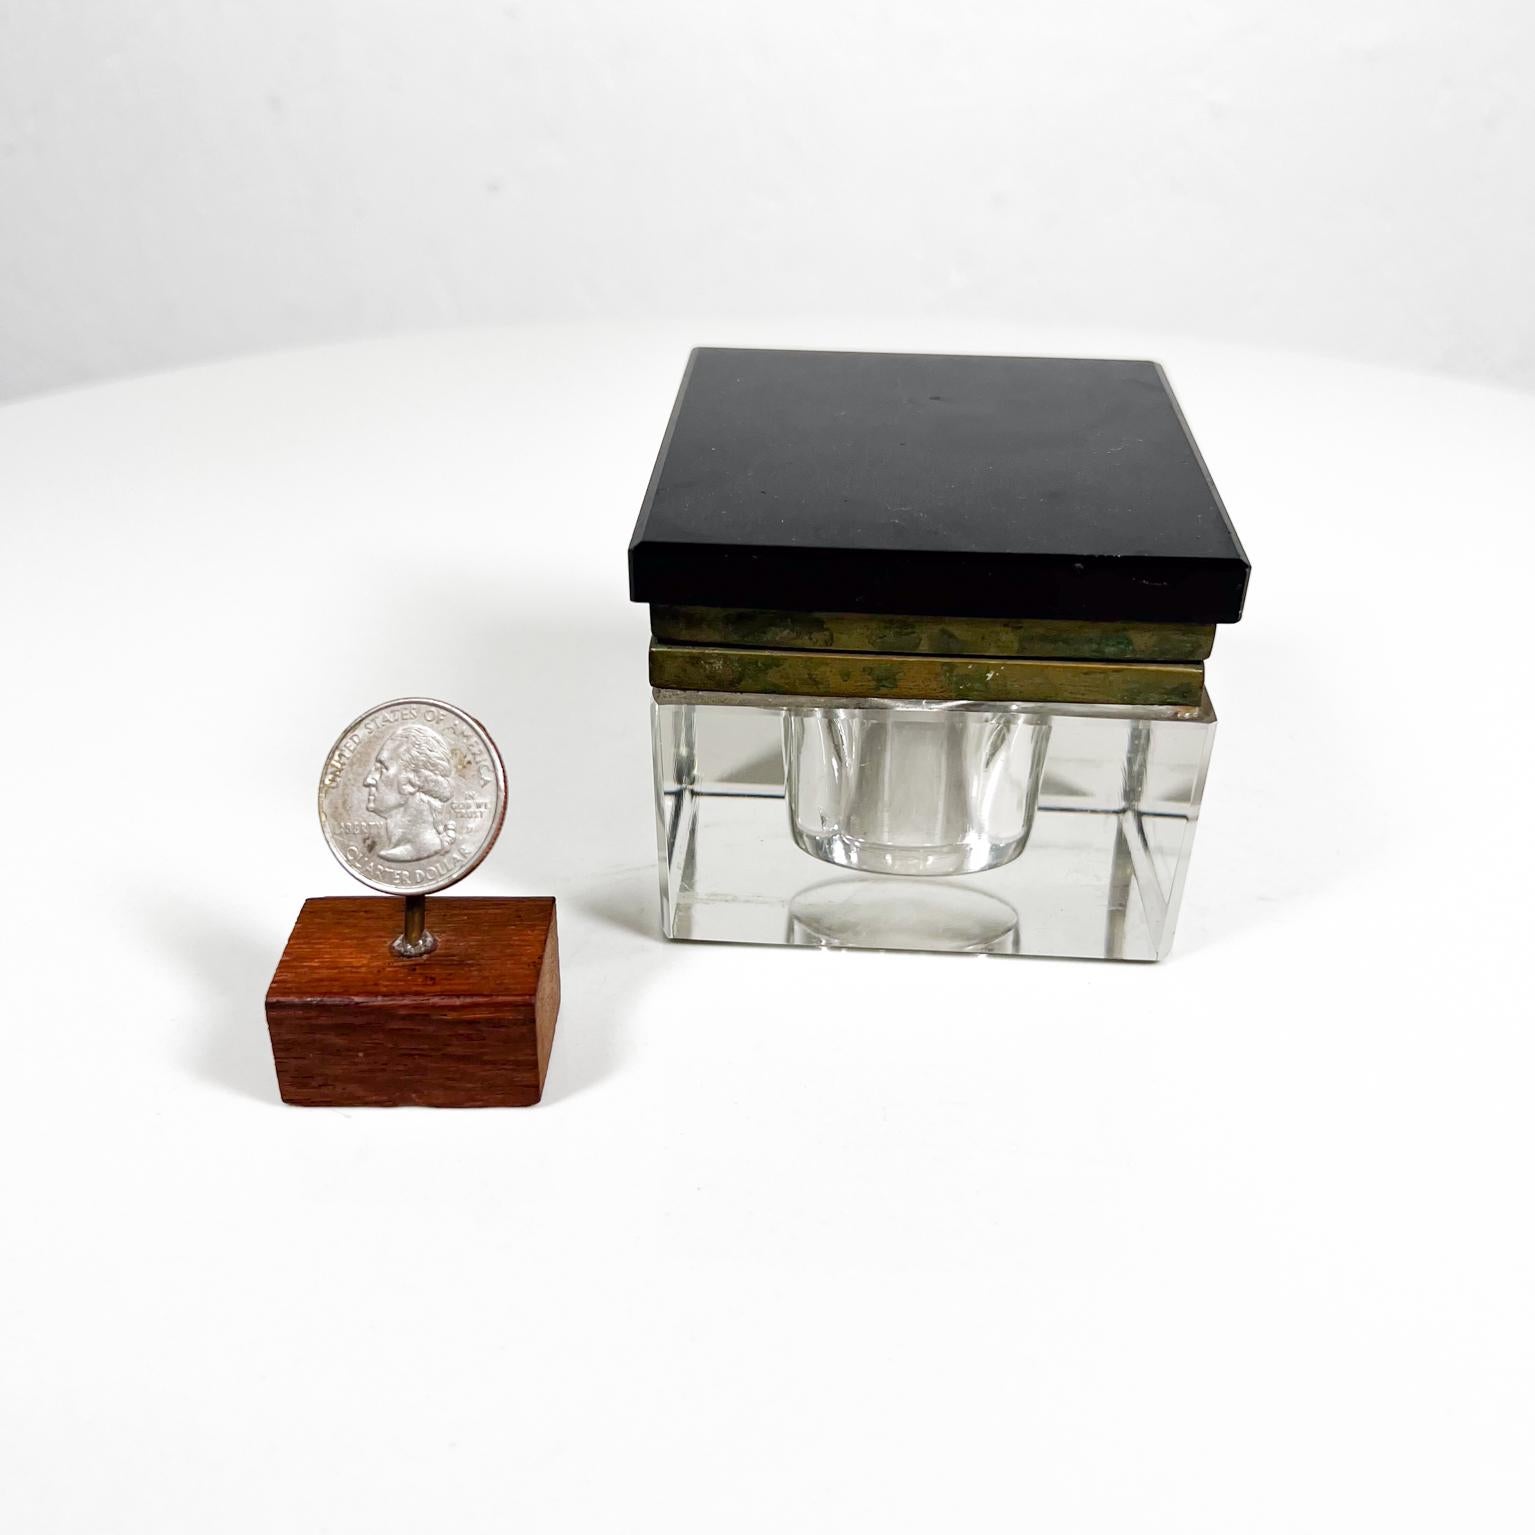 1920s Art Deco Clear Beveled Solid Glass Inkwell with Brass Hinged Black Onyx Glass Top
2.88 x 2.88 x 2.38 H.
Unrestored Preowned vintage condition.
See images provided.